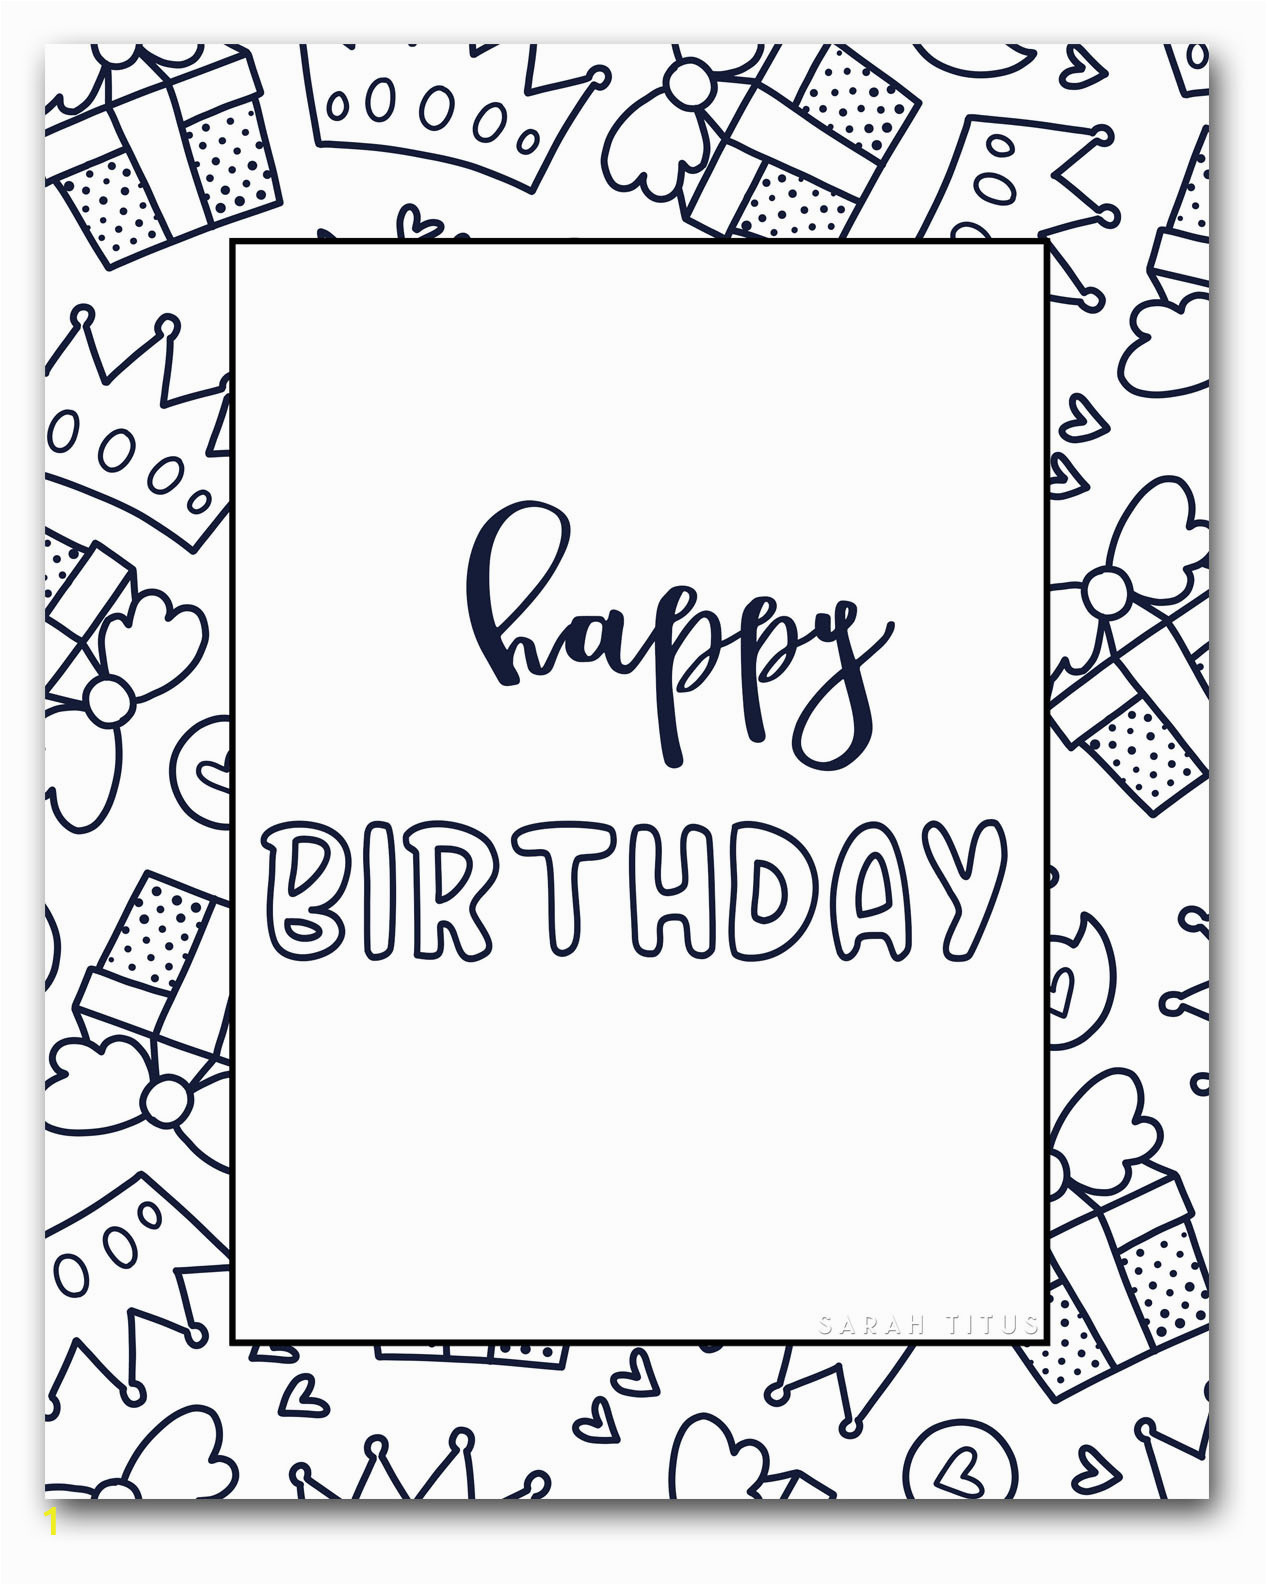 Happy Birthday Coloring Pages Free to Print Coloring Pages Ideas Happy Birthday Coloring Pages Happy